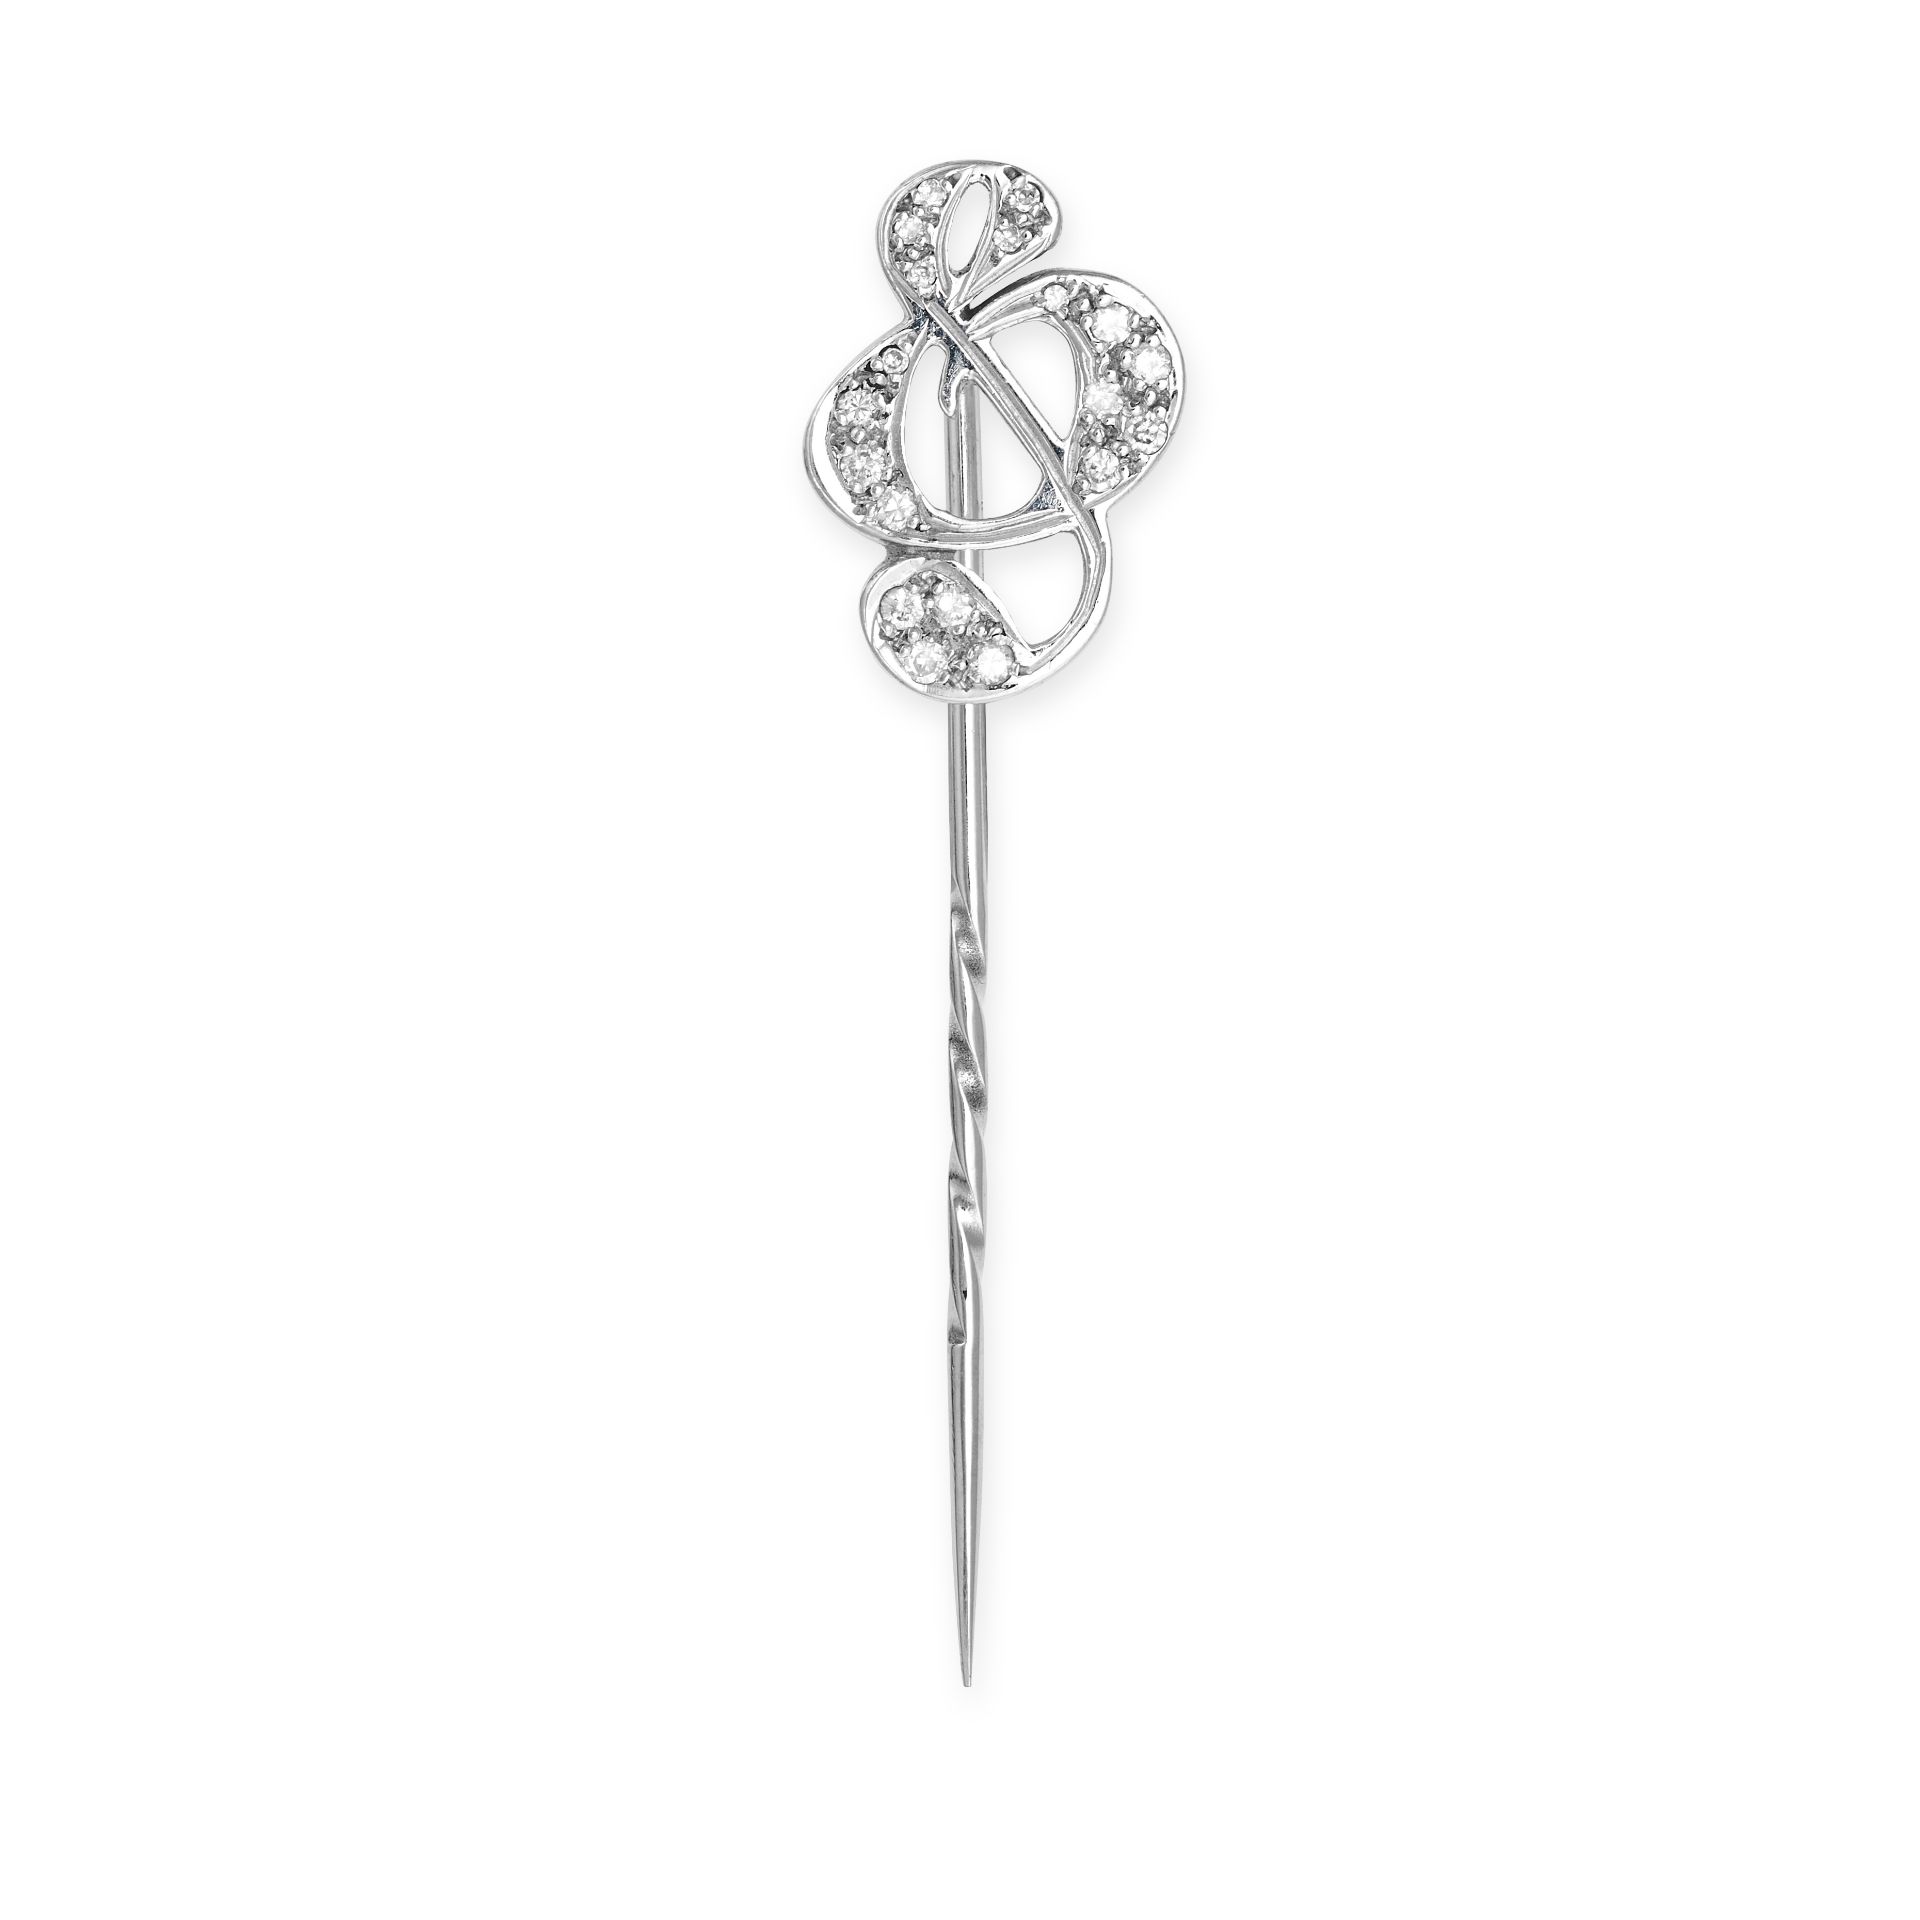 THEO FENNEL, A VINTAGE DIAMOND STICK PIN in 18ct white gold, designed as a treble clef set with r...